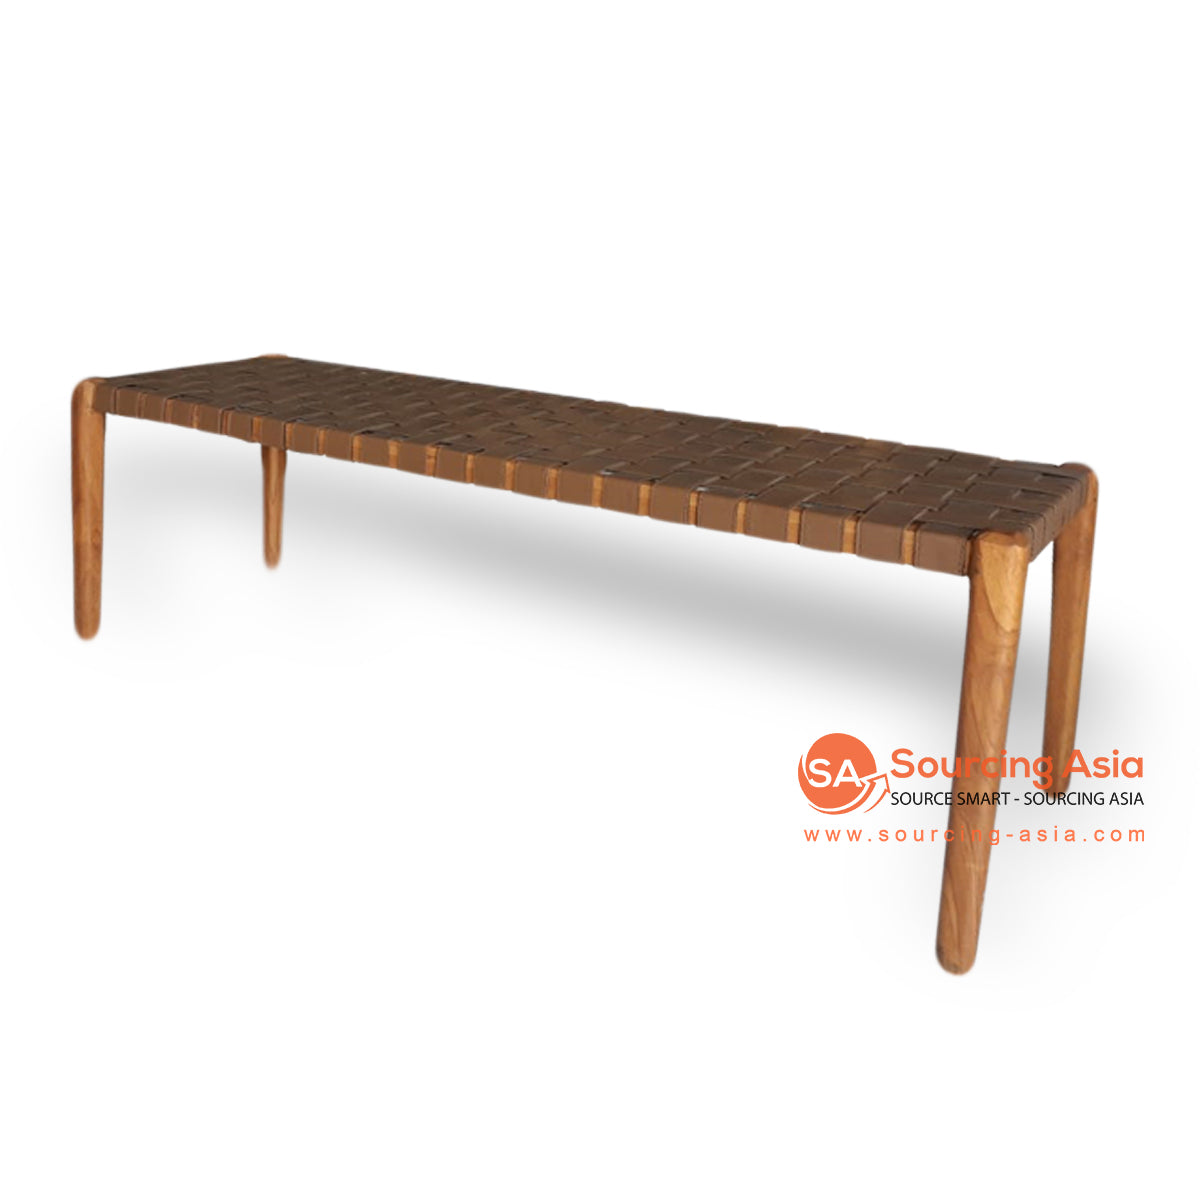 AOU001 BROWN TEAK WOOD AND WOVEN LEATHER BED END BENCH